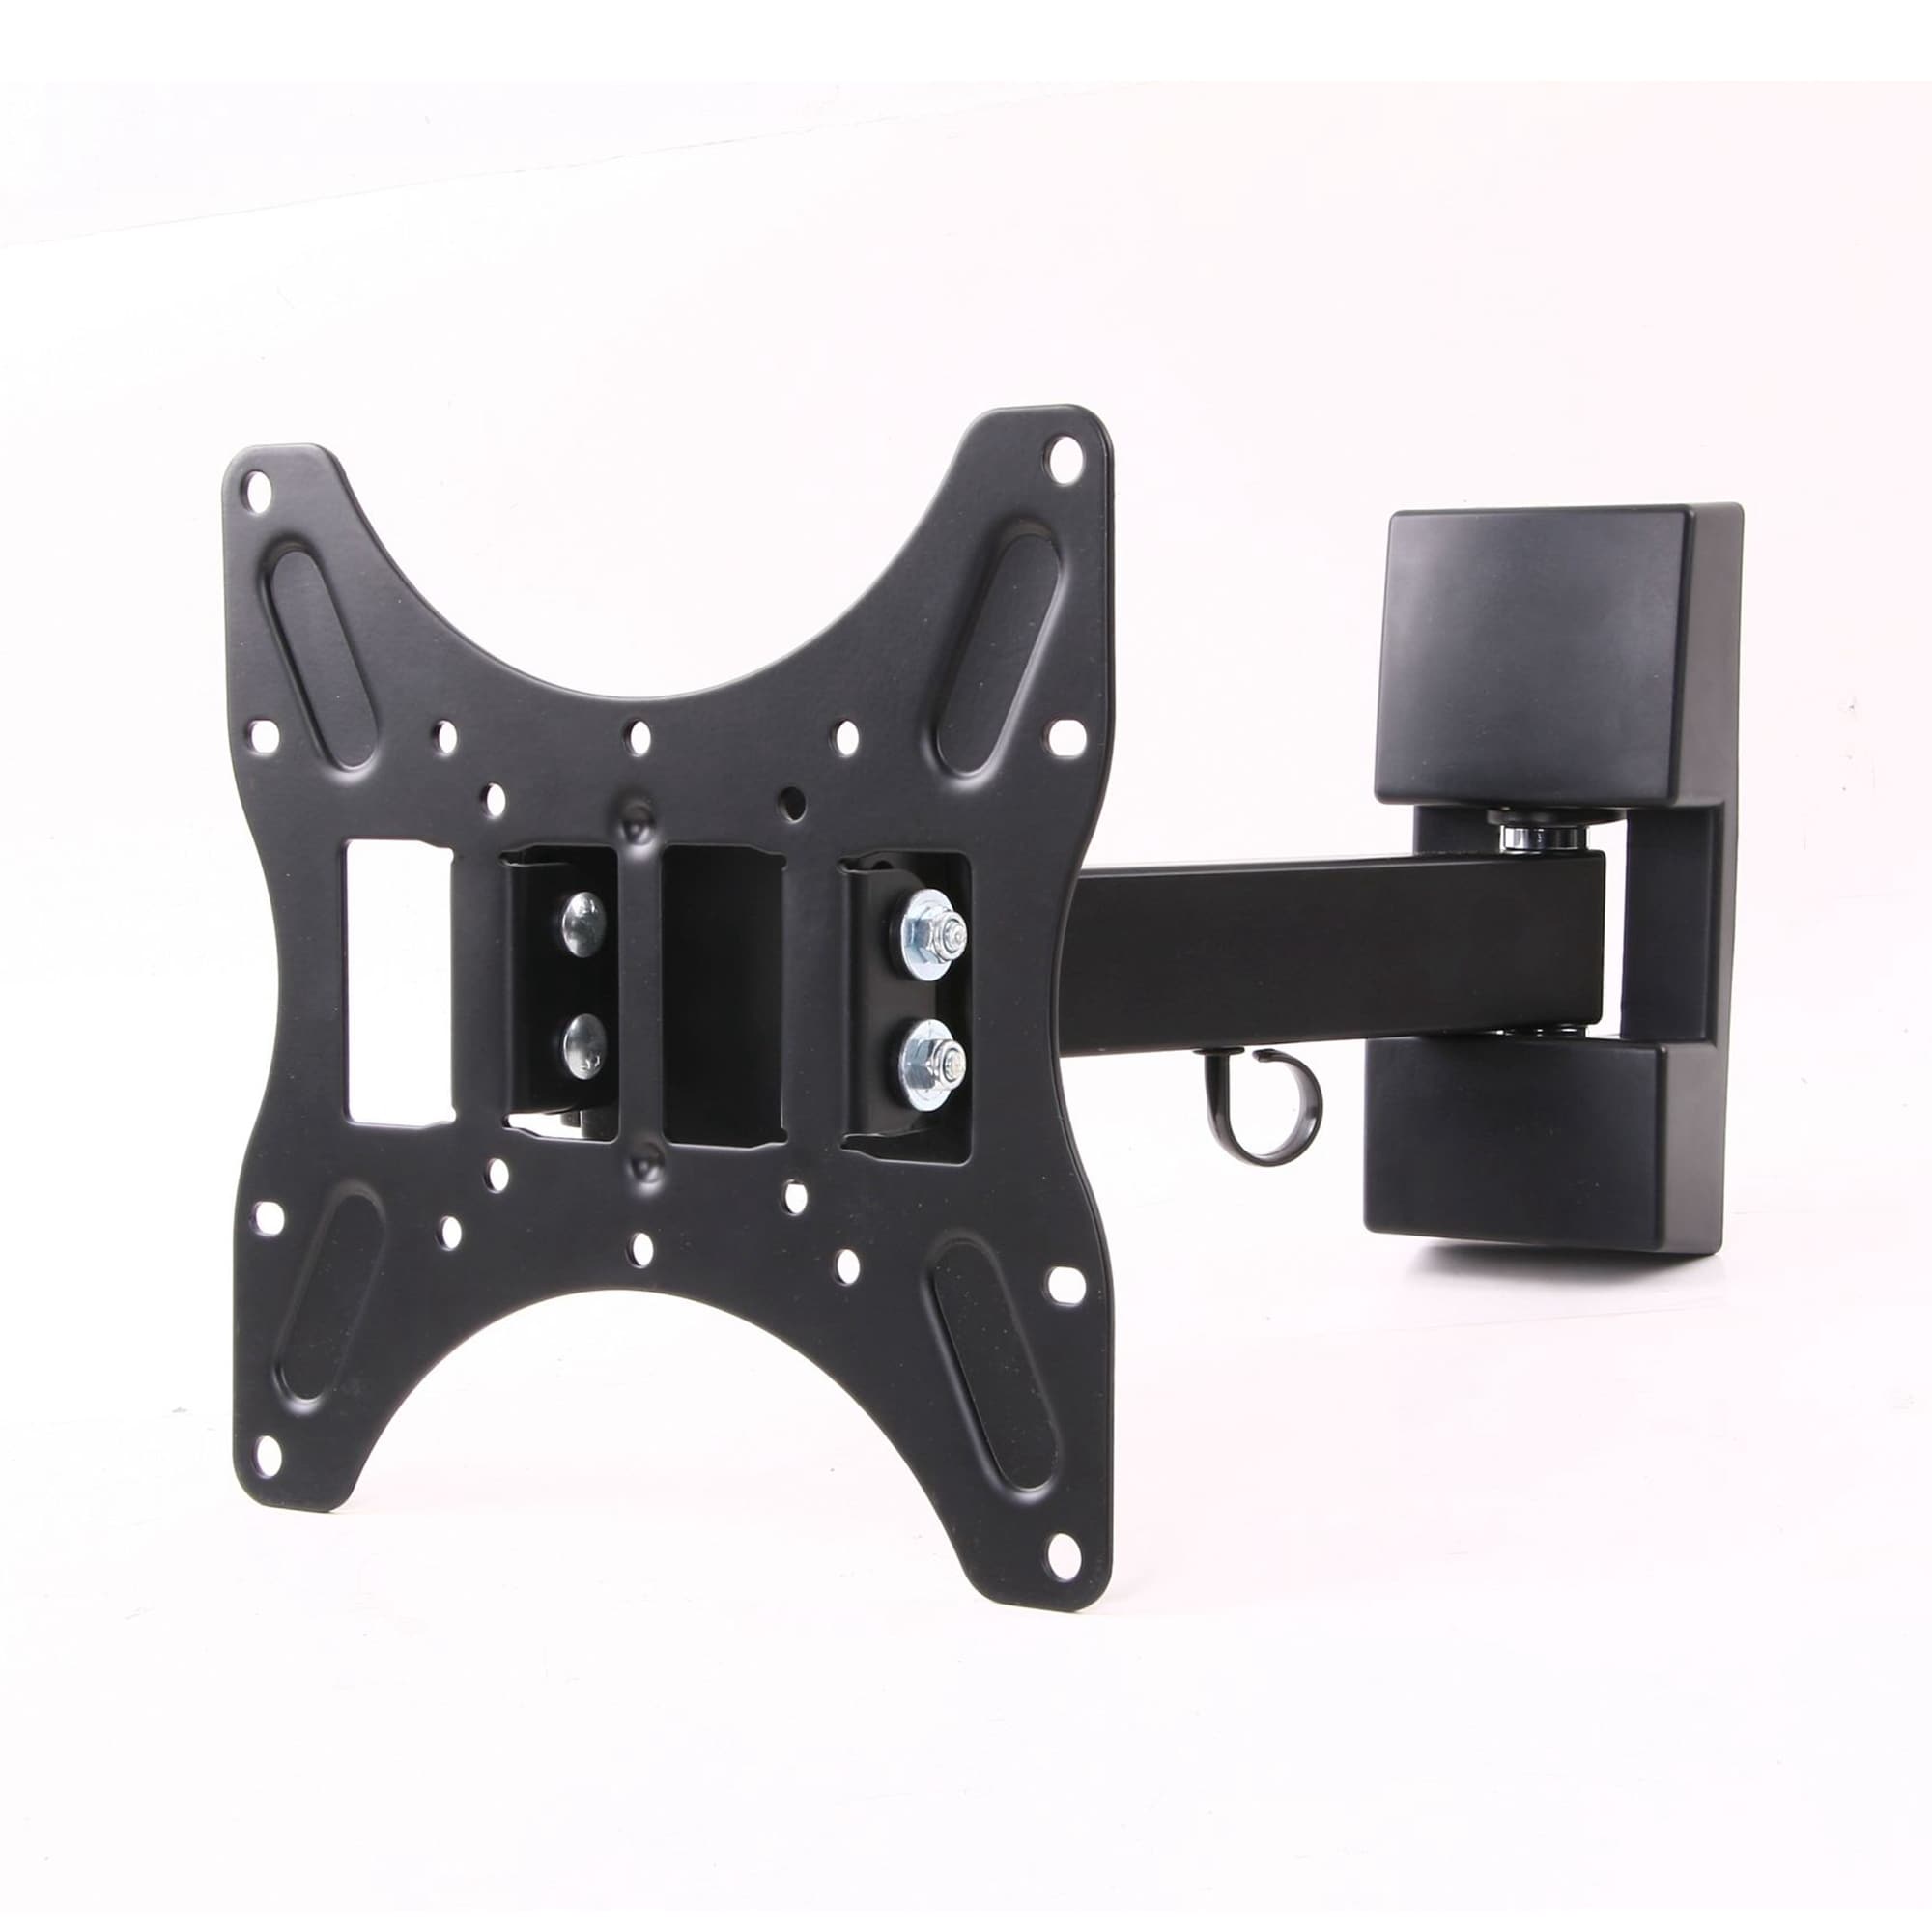 TygerClaw Full Motion Wall Mount for 14 in. to 40 in. Flat Panel TV - Black - One Size